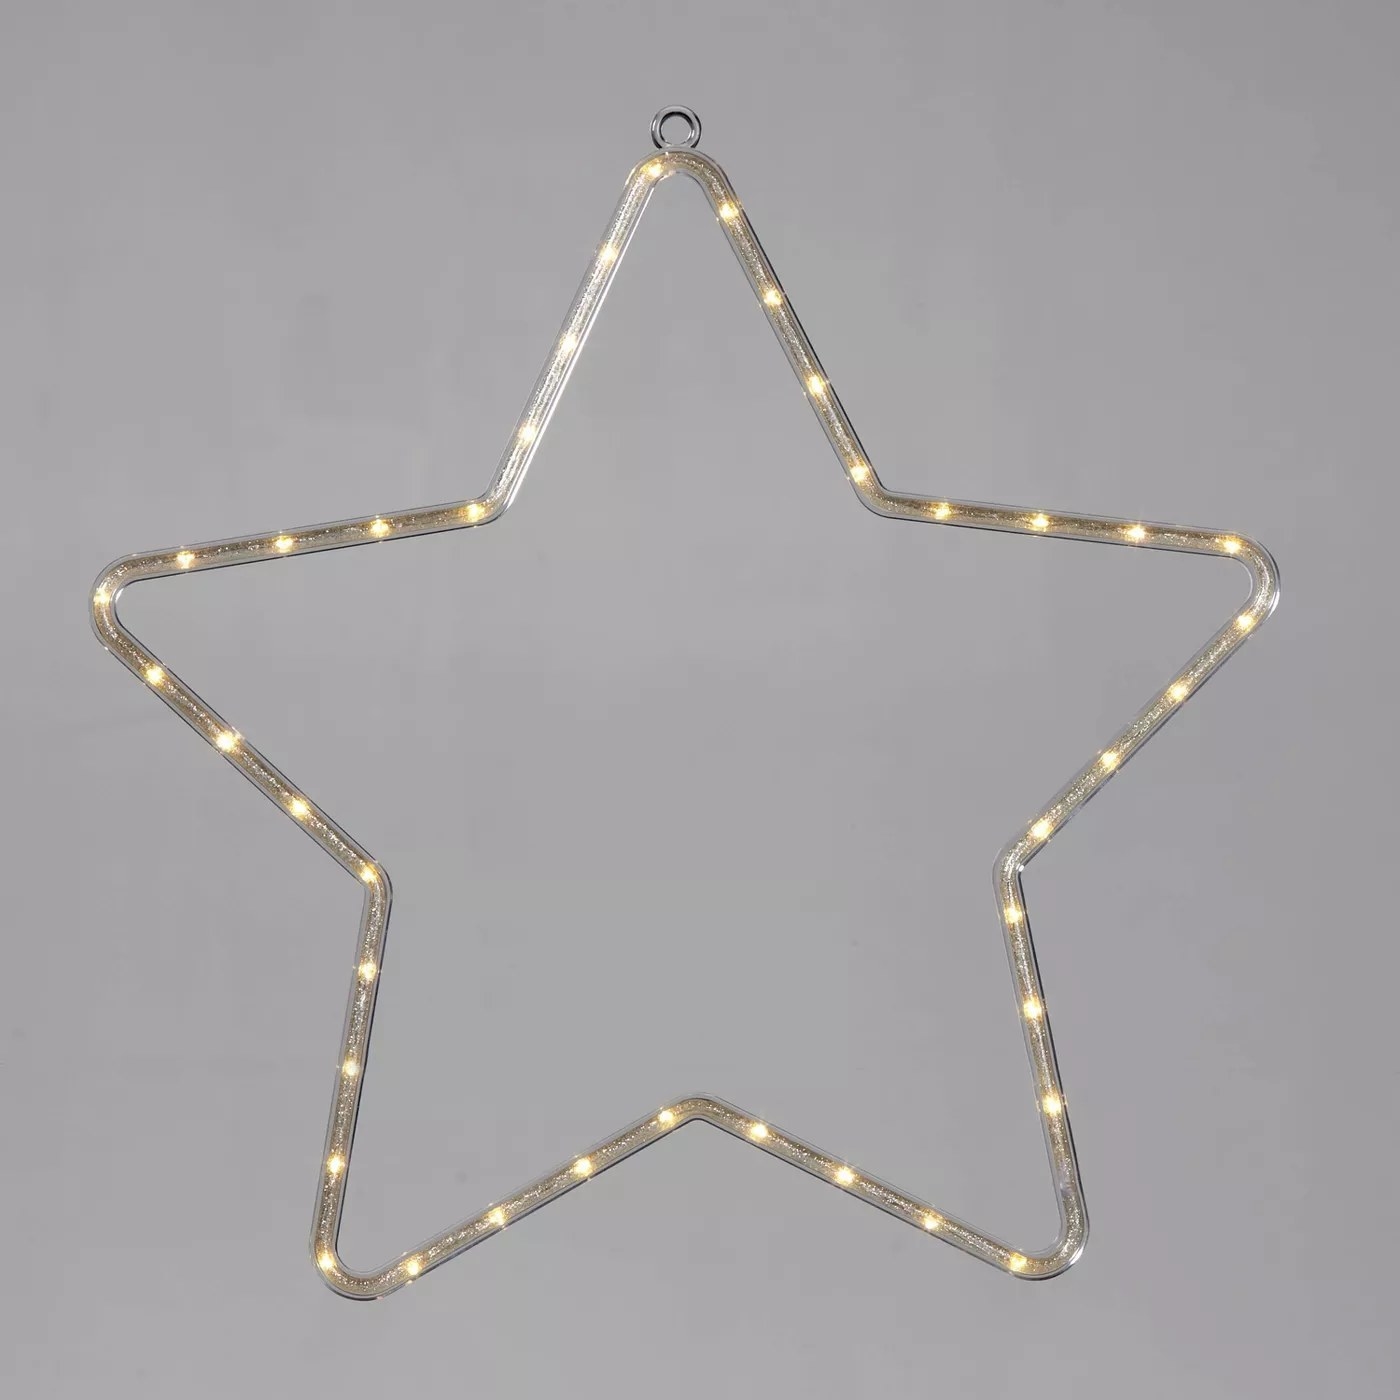 The gold glittery star